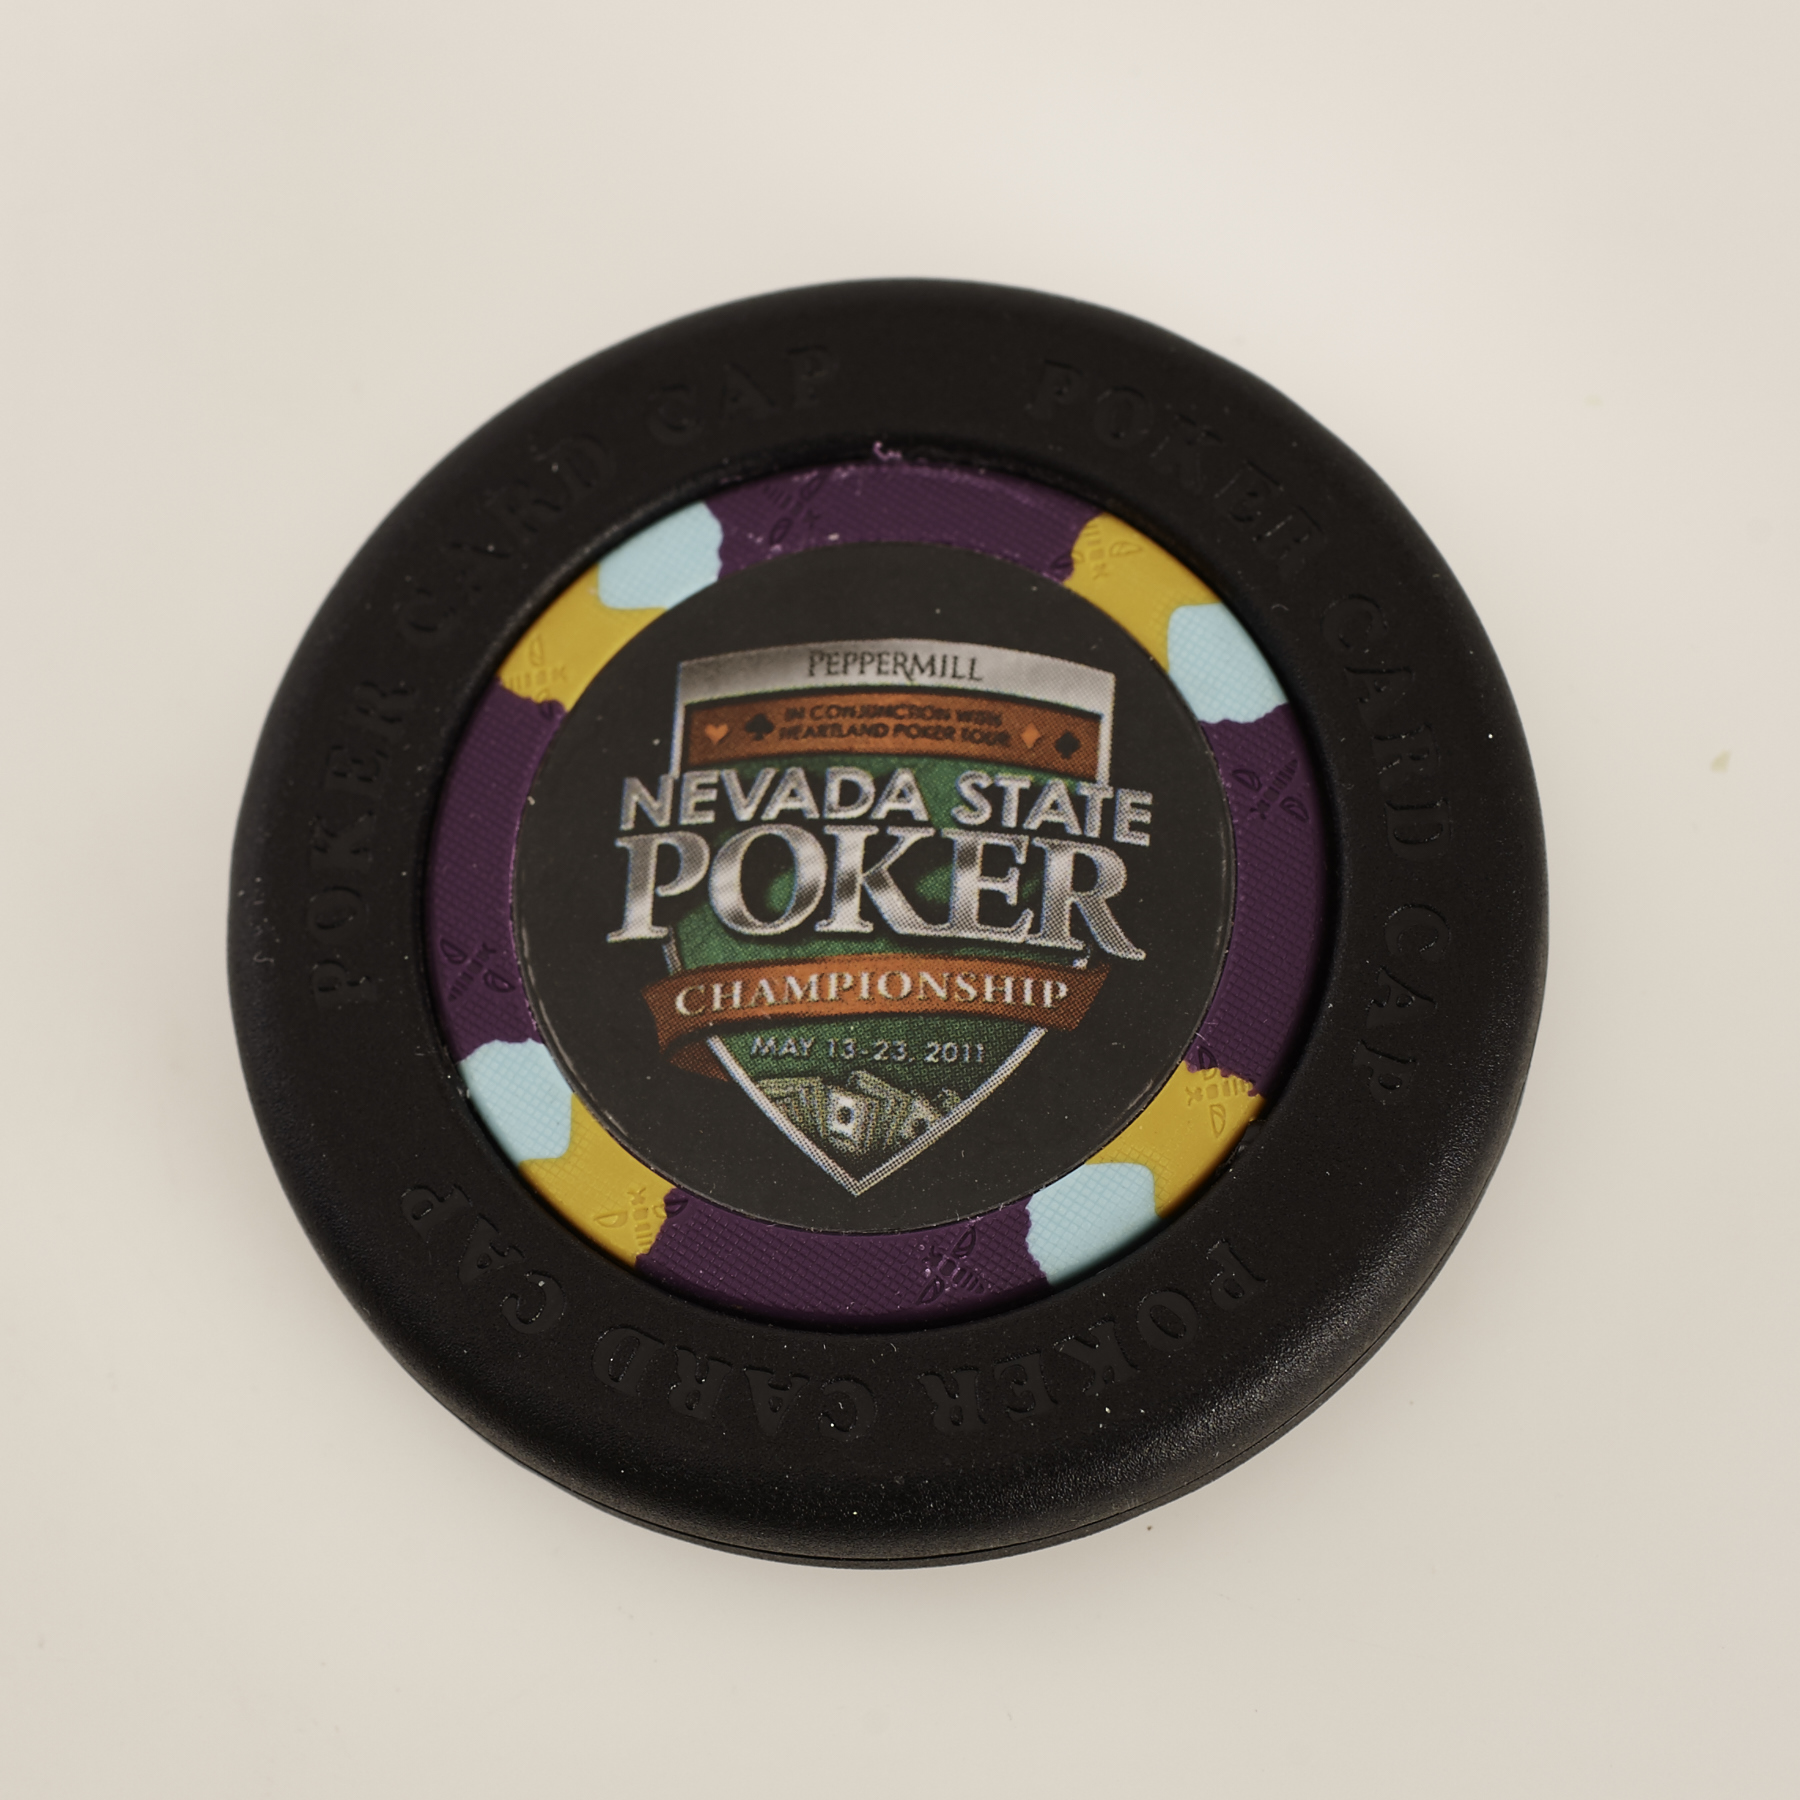 PEPPERMILL IN CONJUNCTION WITH HEARTLAND POKER TOUR, CHAMPIONSHIP, 2011, Poker Card Guard